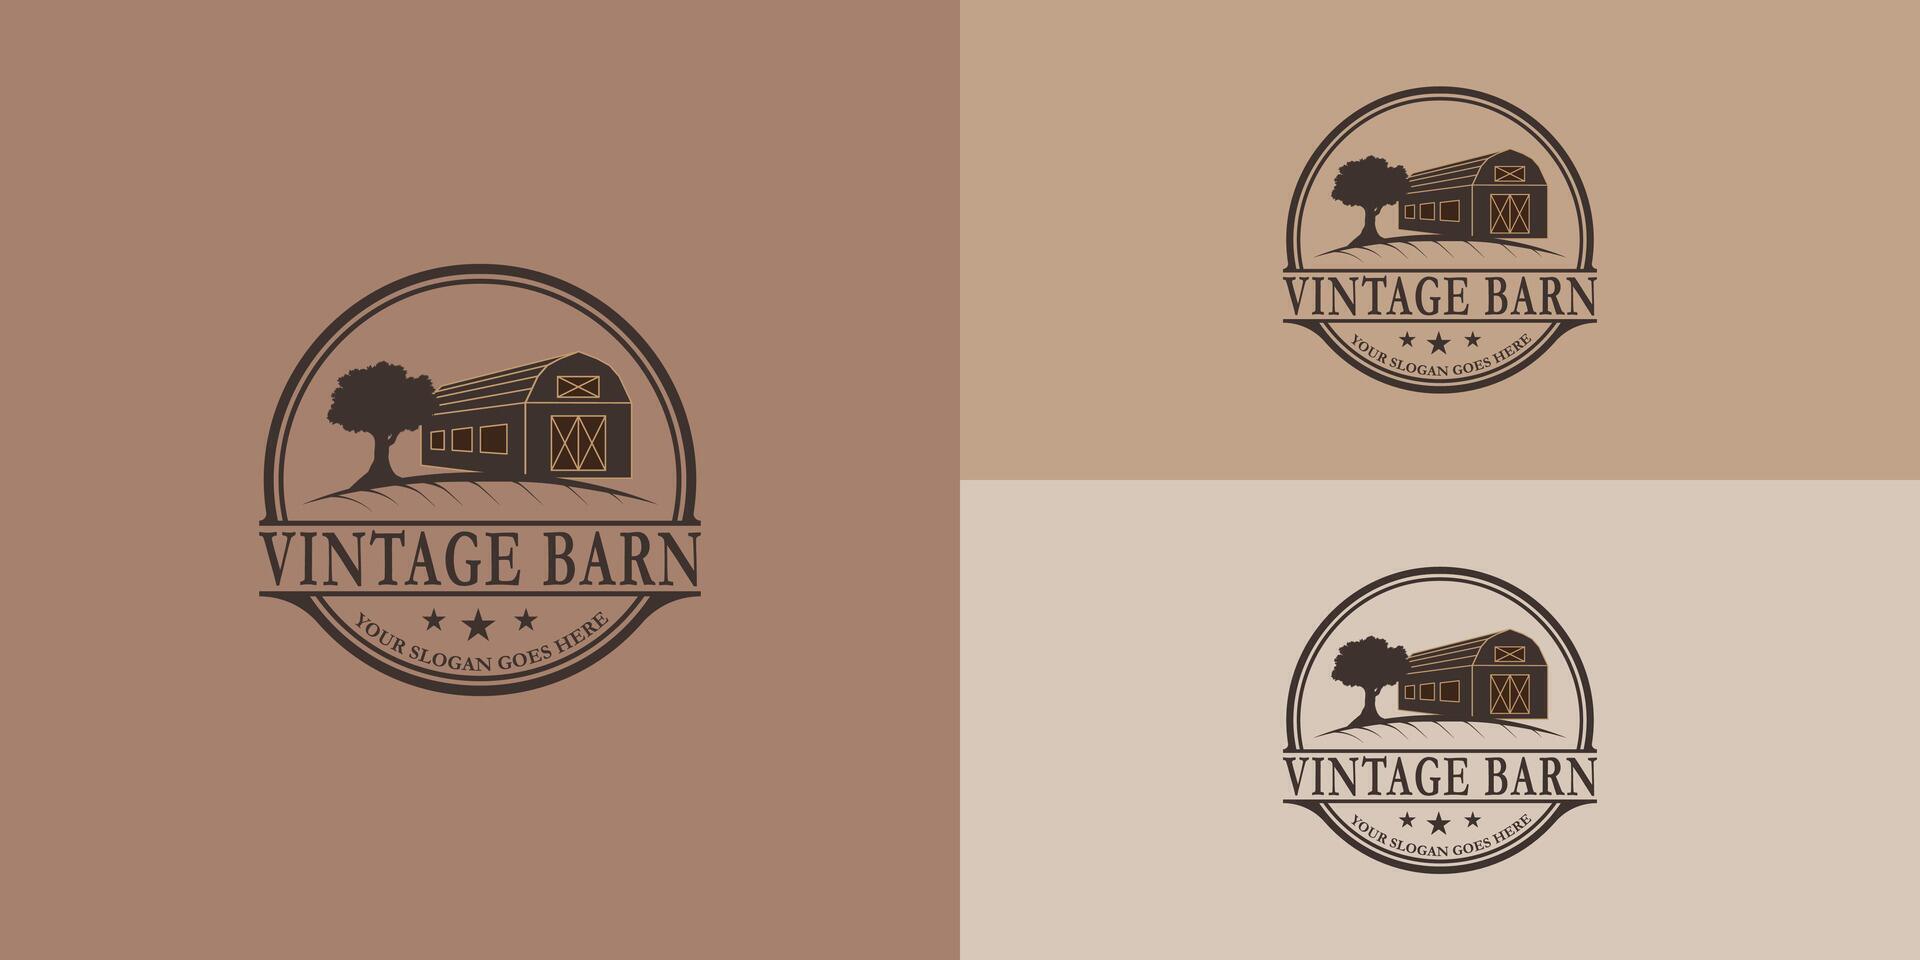 Vintage stamp brown wood barn with oak tree logo design in classic brown color isolated on multiple background colors. The logo is suitable for ranch and farming house livestock business logo design vector